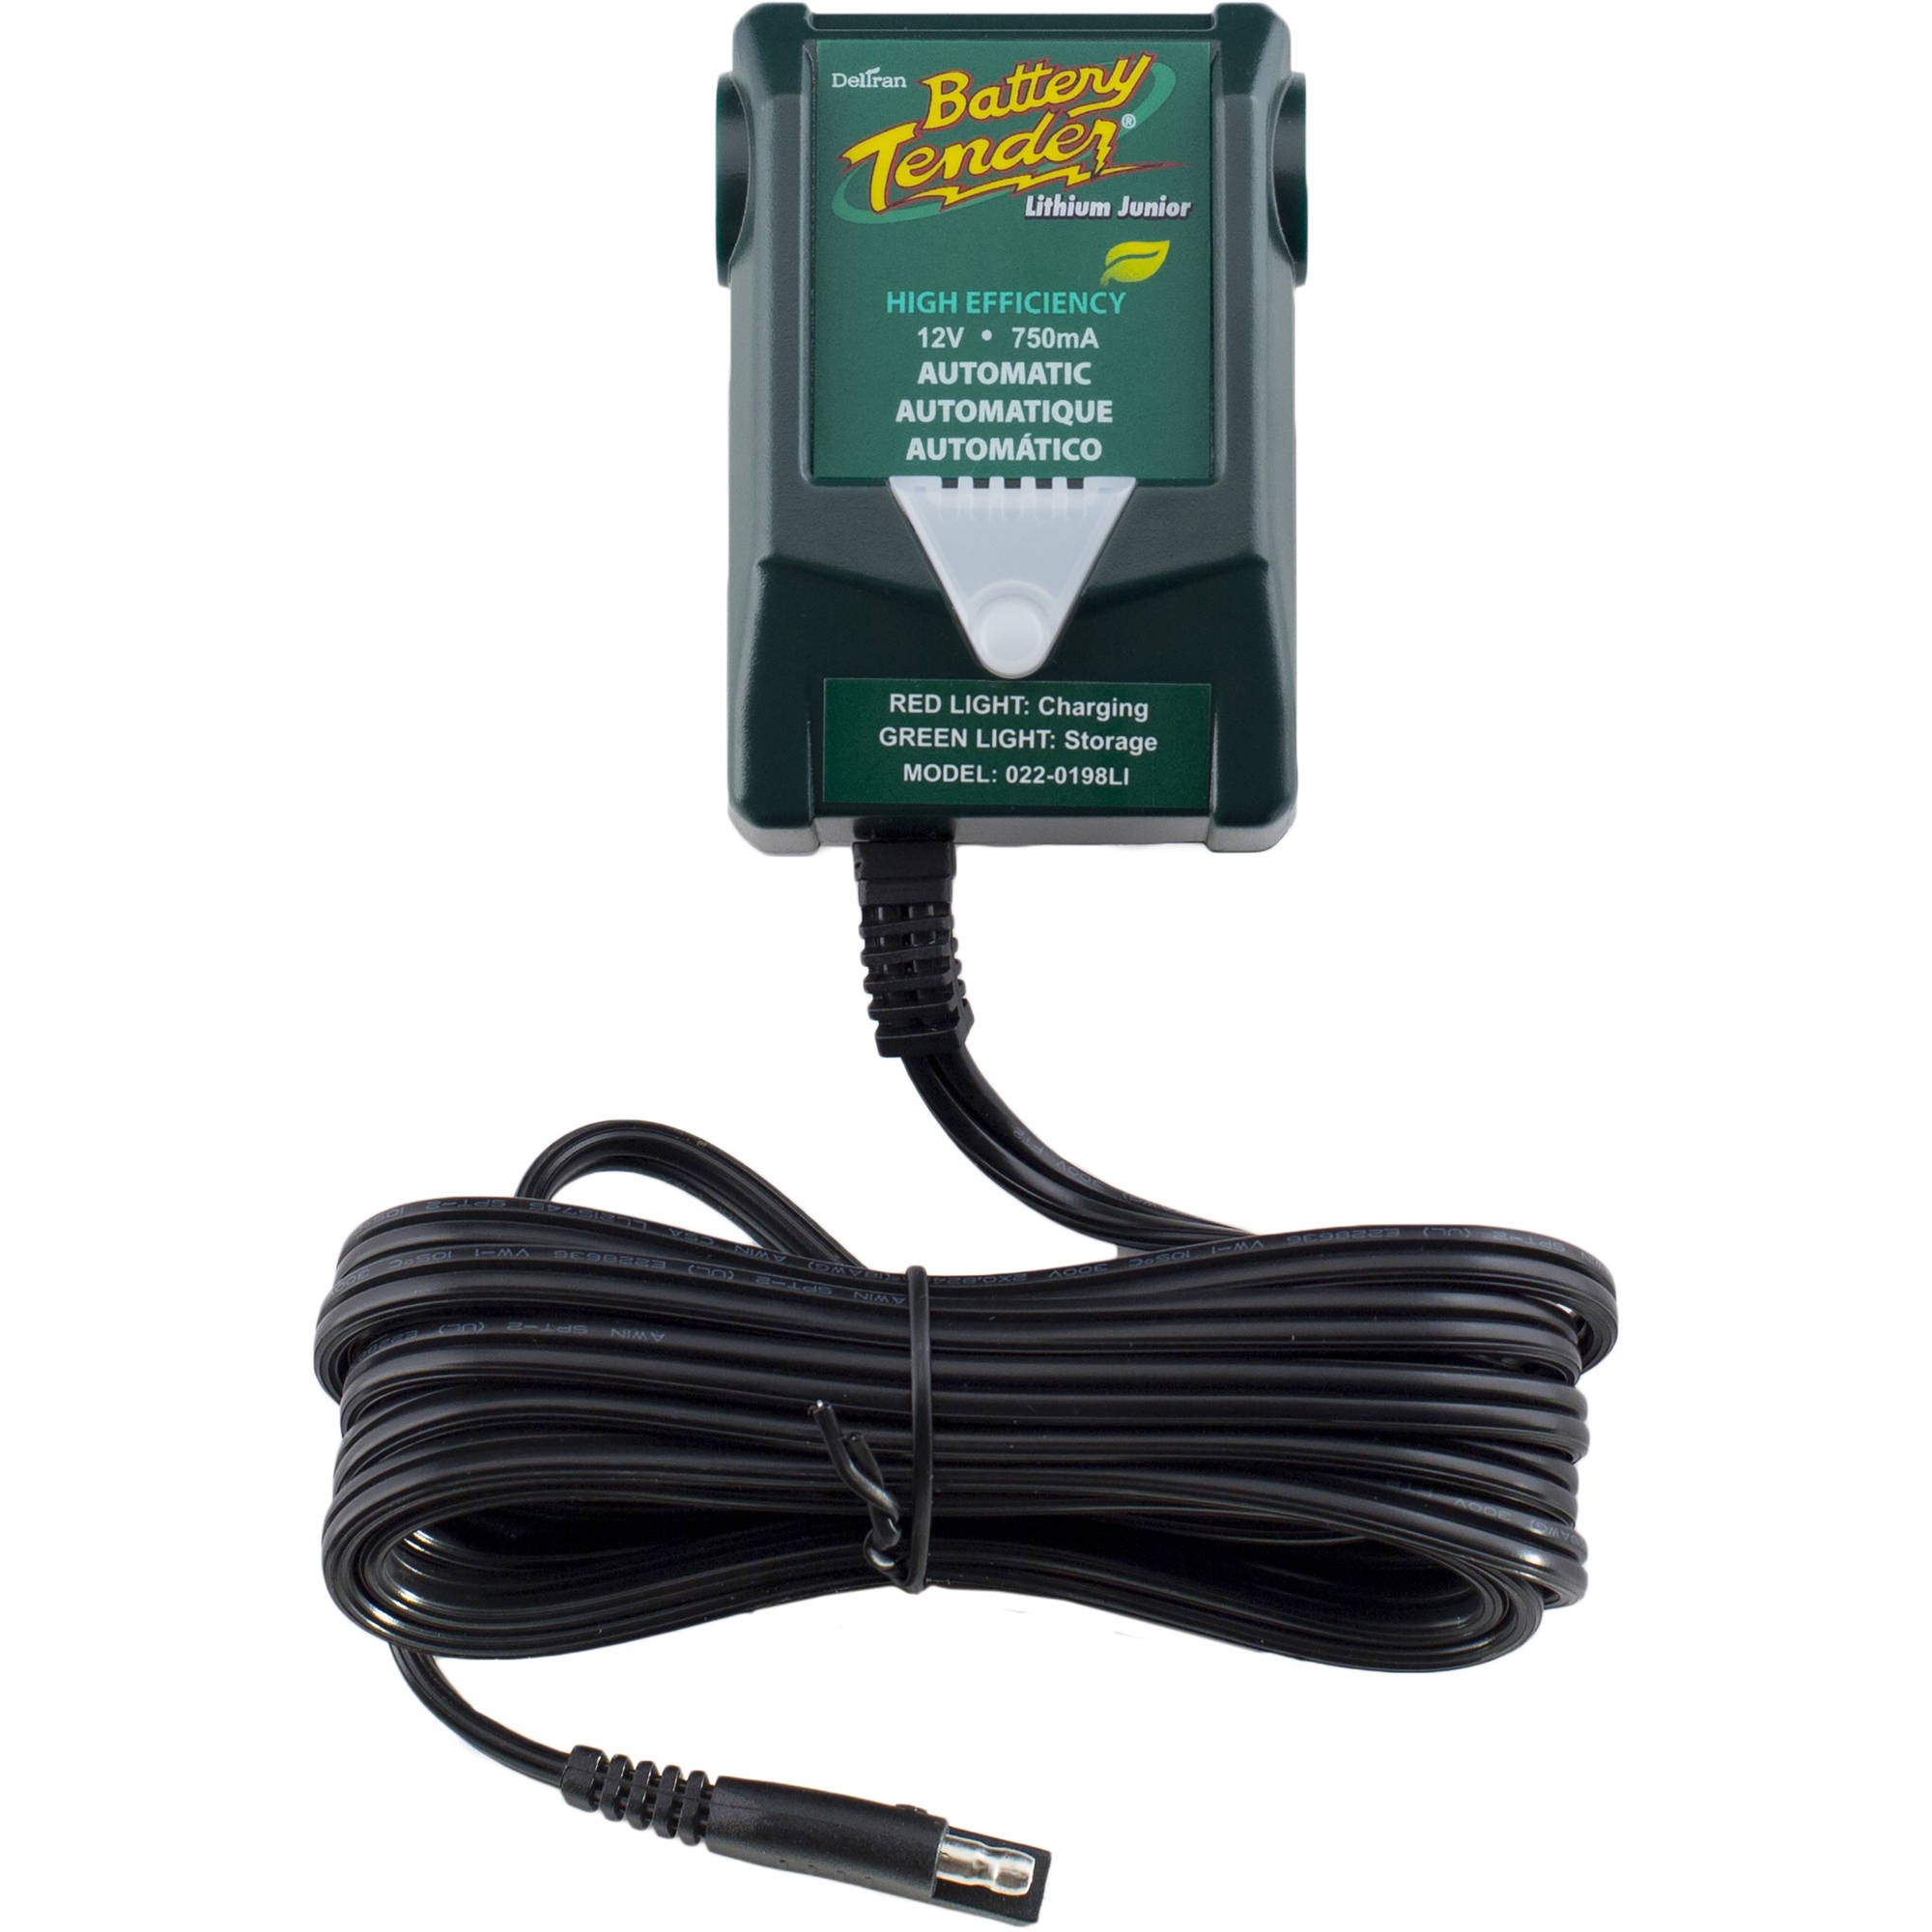 Battery Tender 12V 750Ma Junior High Efficiency Lithium Charger - image 1 of 1